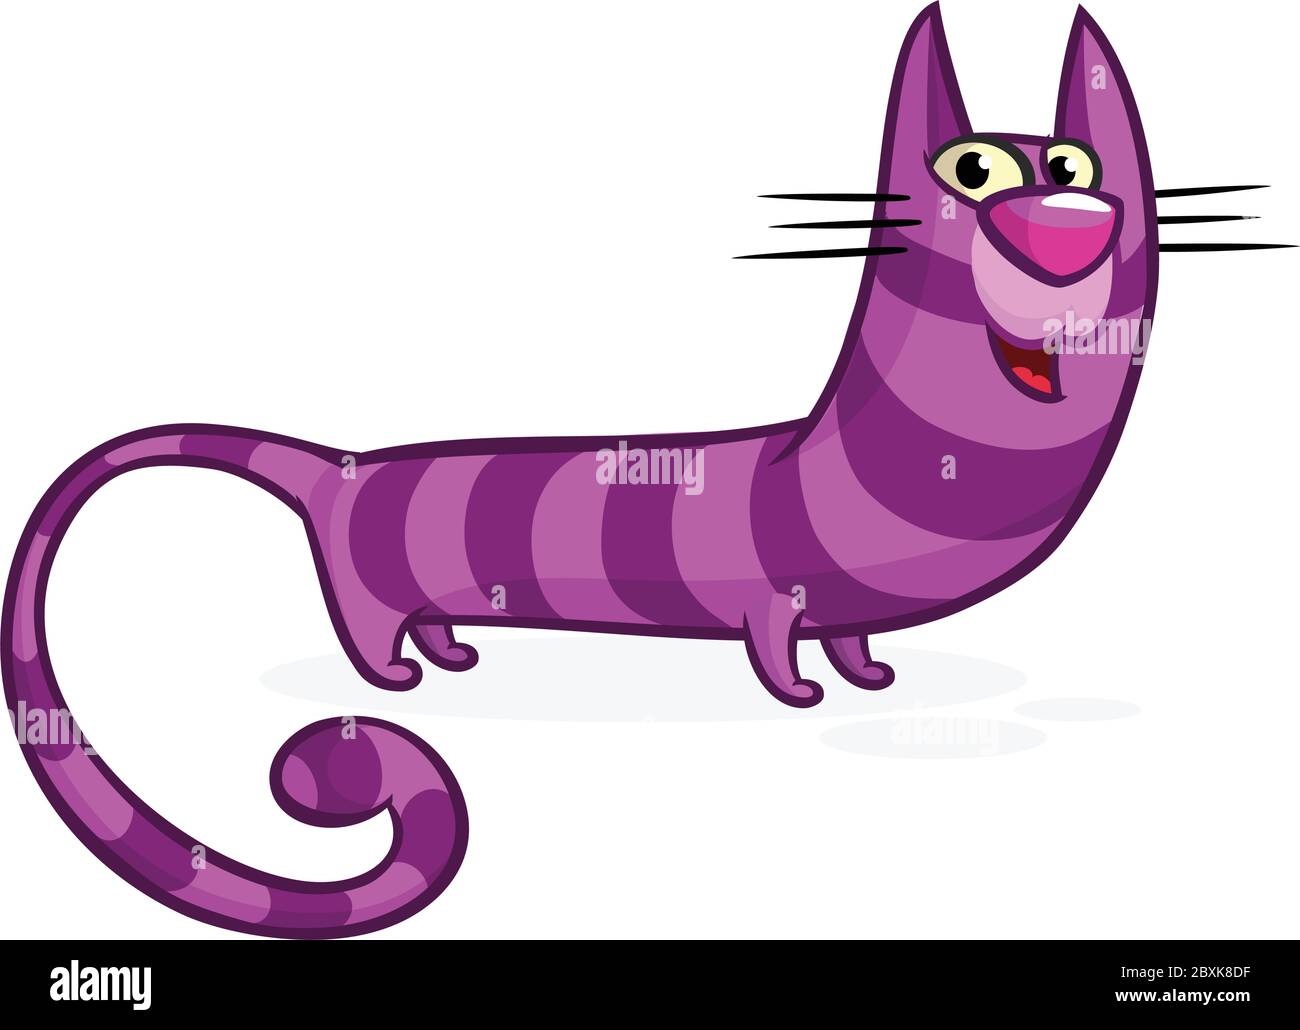 Funny striped cat cartoon. Vector illustration of walking cat outlined Stock Vector